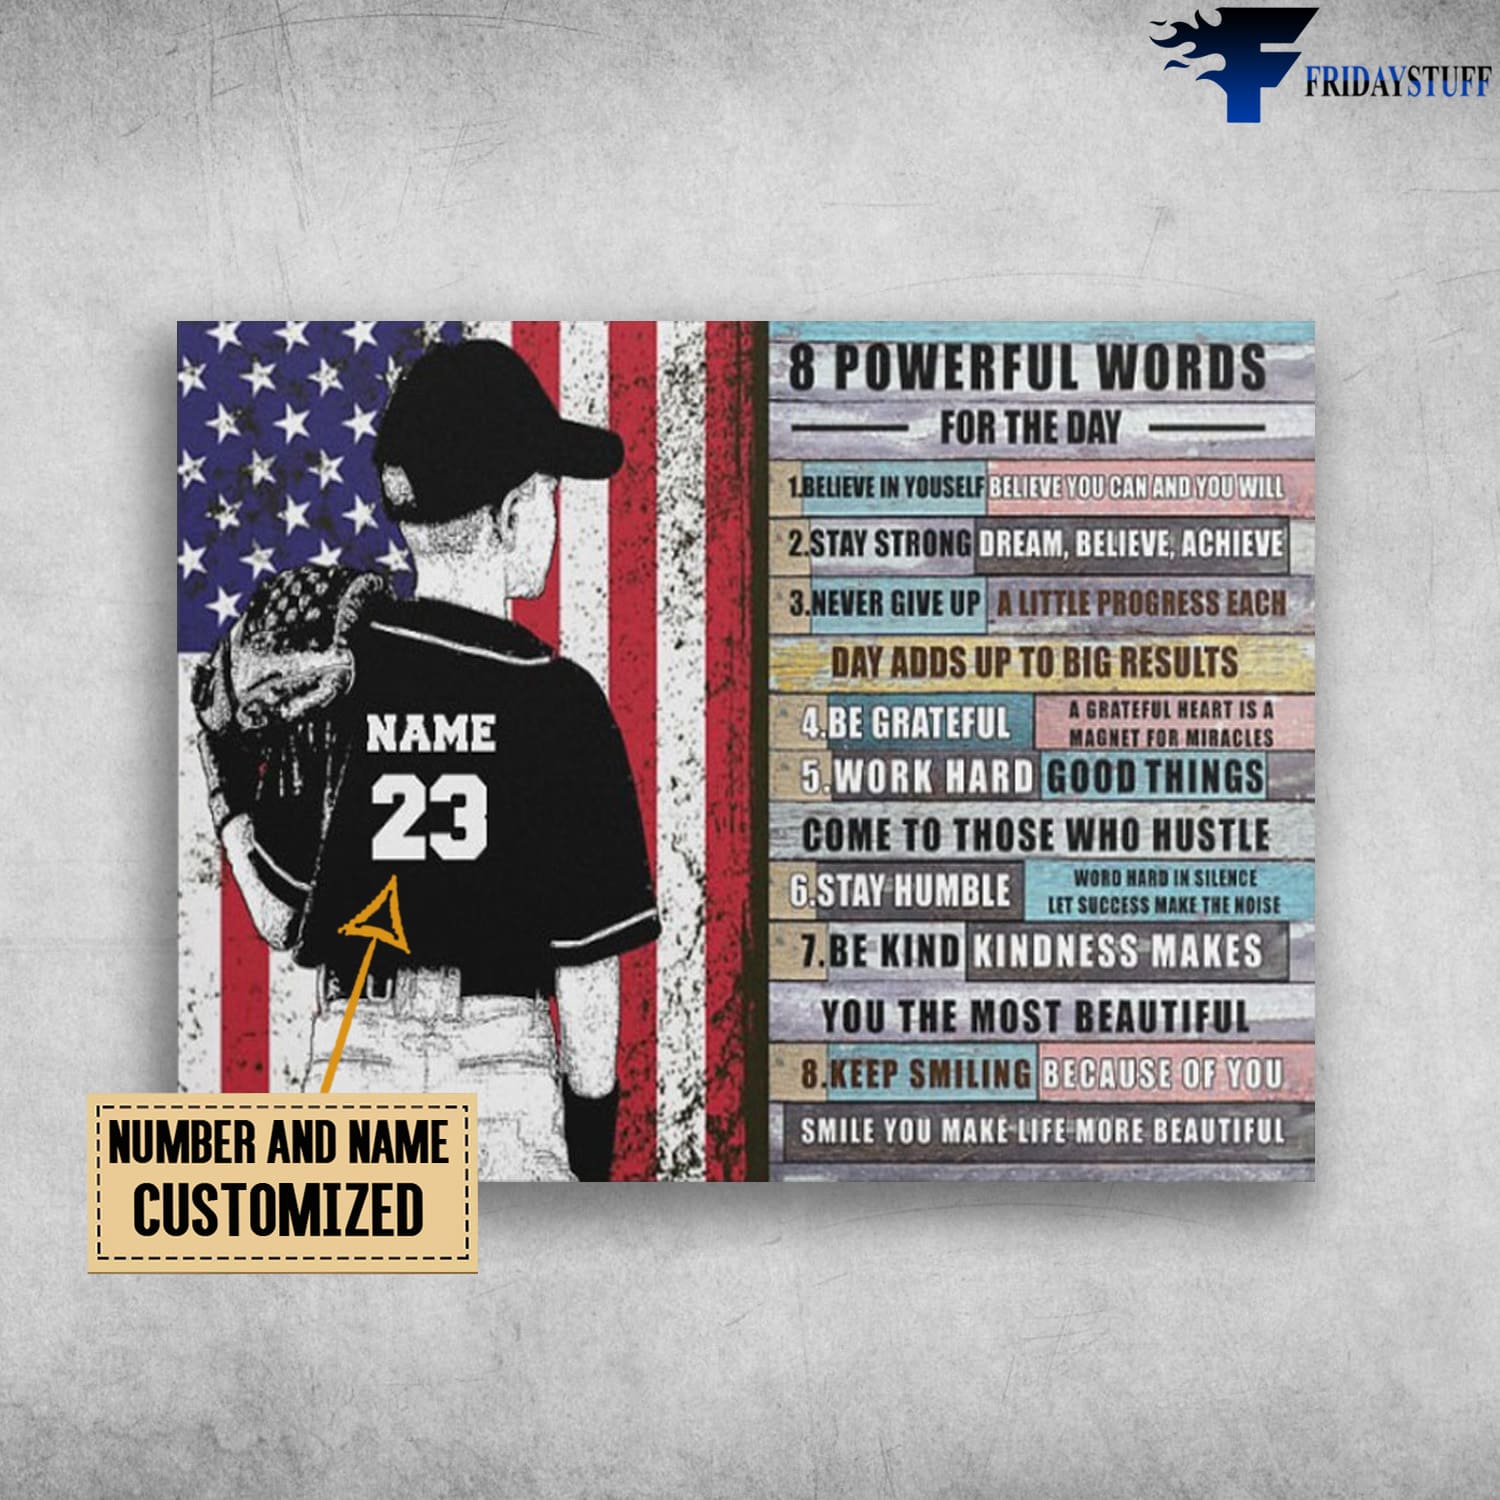 Baseball Poster, American Baseball, 8 Powerful Words For The Day, Believe In Yourself, Stay Strong, Never Give Up, Be Grateful, Work Hard, Stay Humble, Be Kind, Keep Smiling